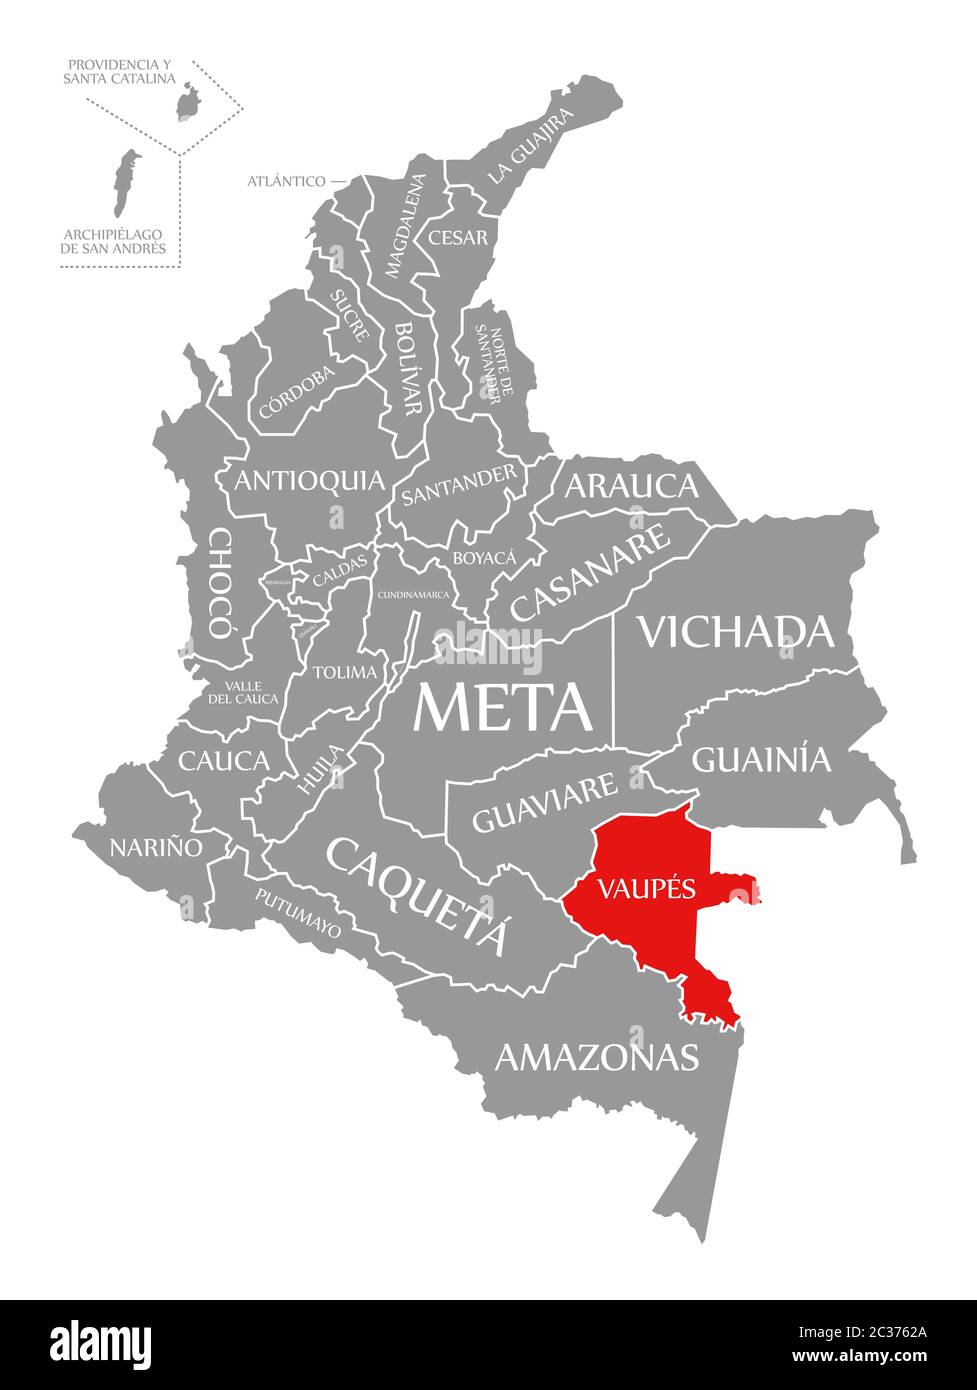 Vaupes red highlighted in map of Colombia Stock Photo